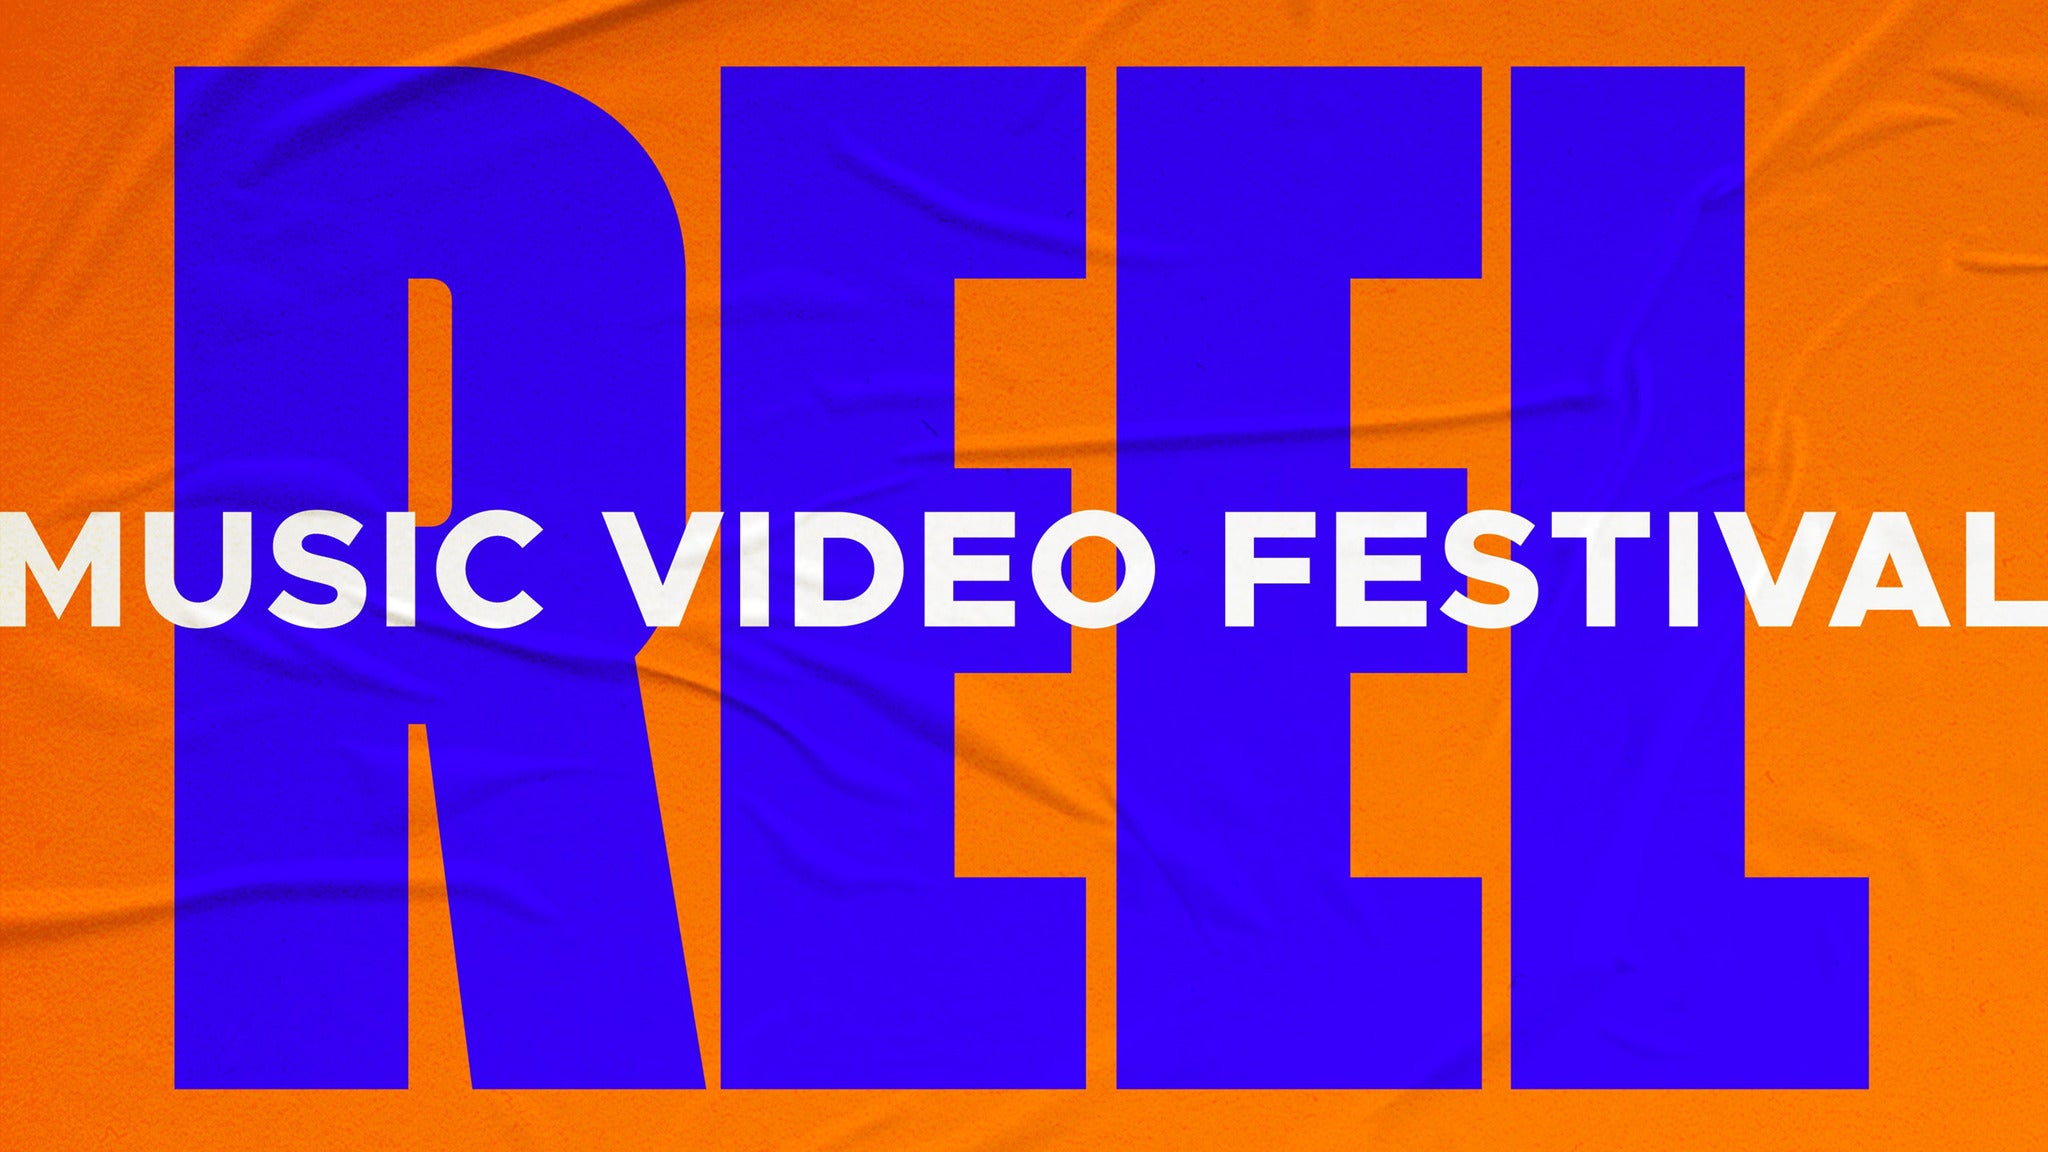 Image used with permission from Ticketmaster | Reel Music Video Festival tickets